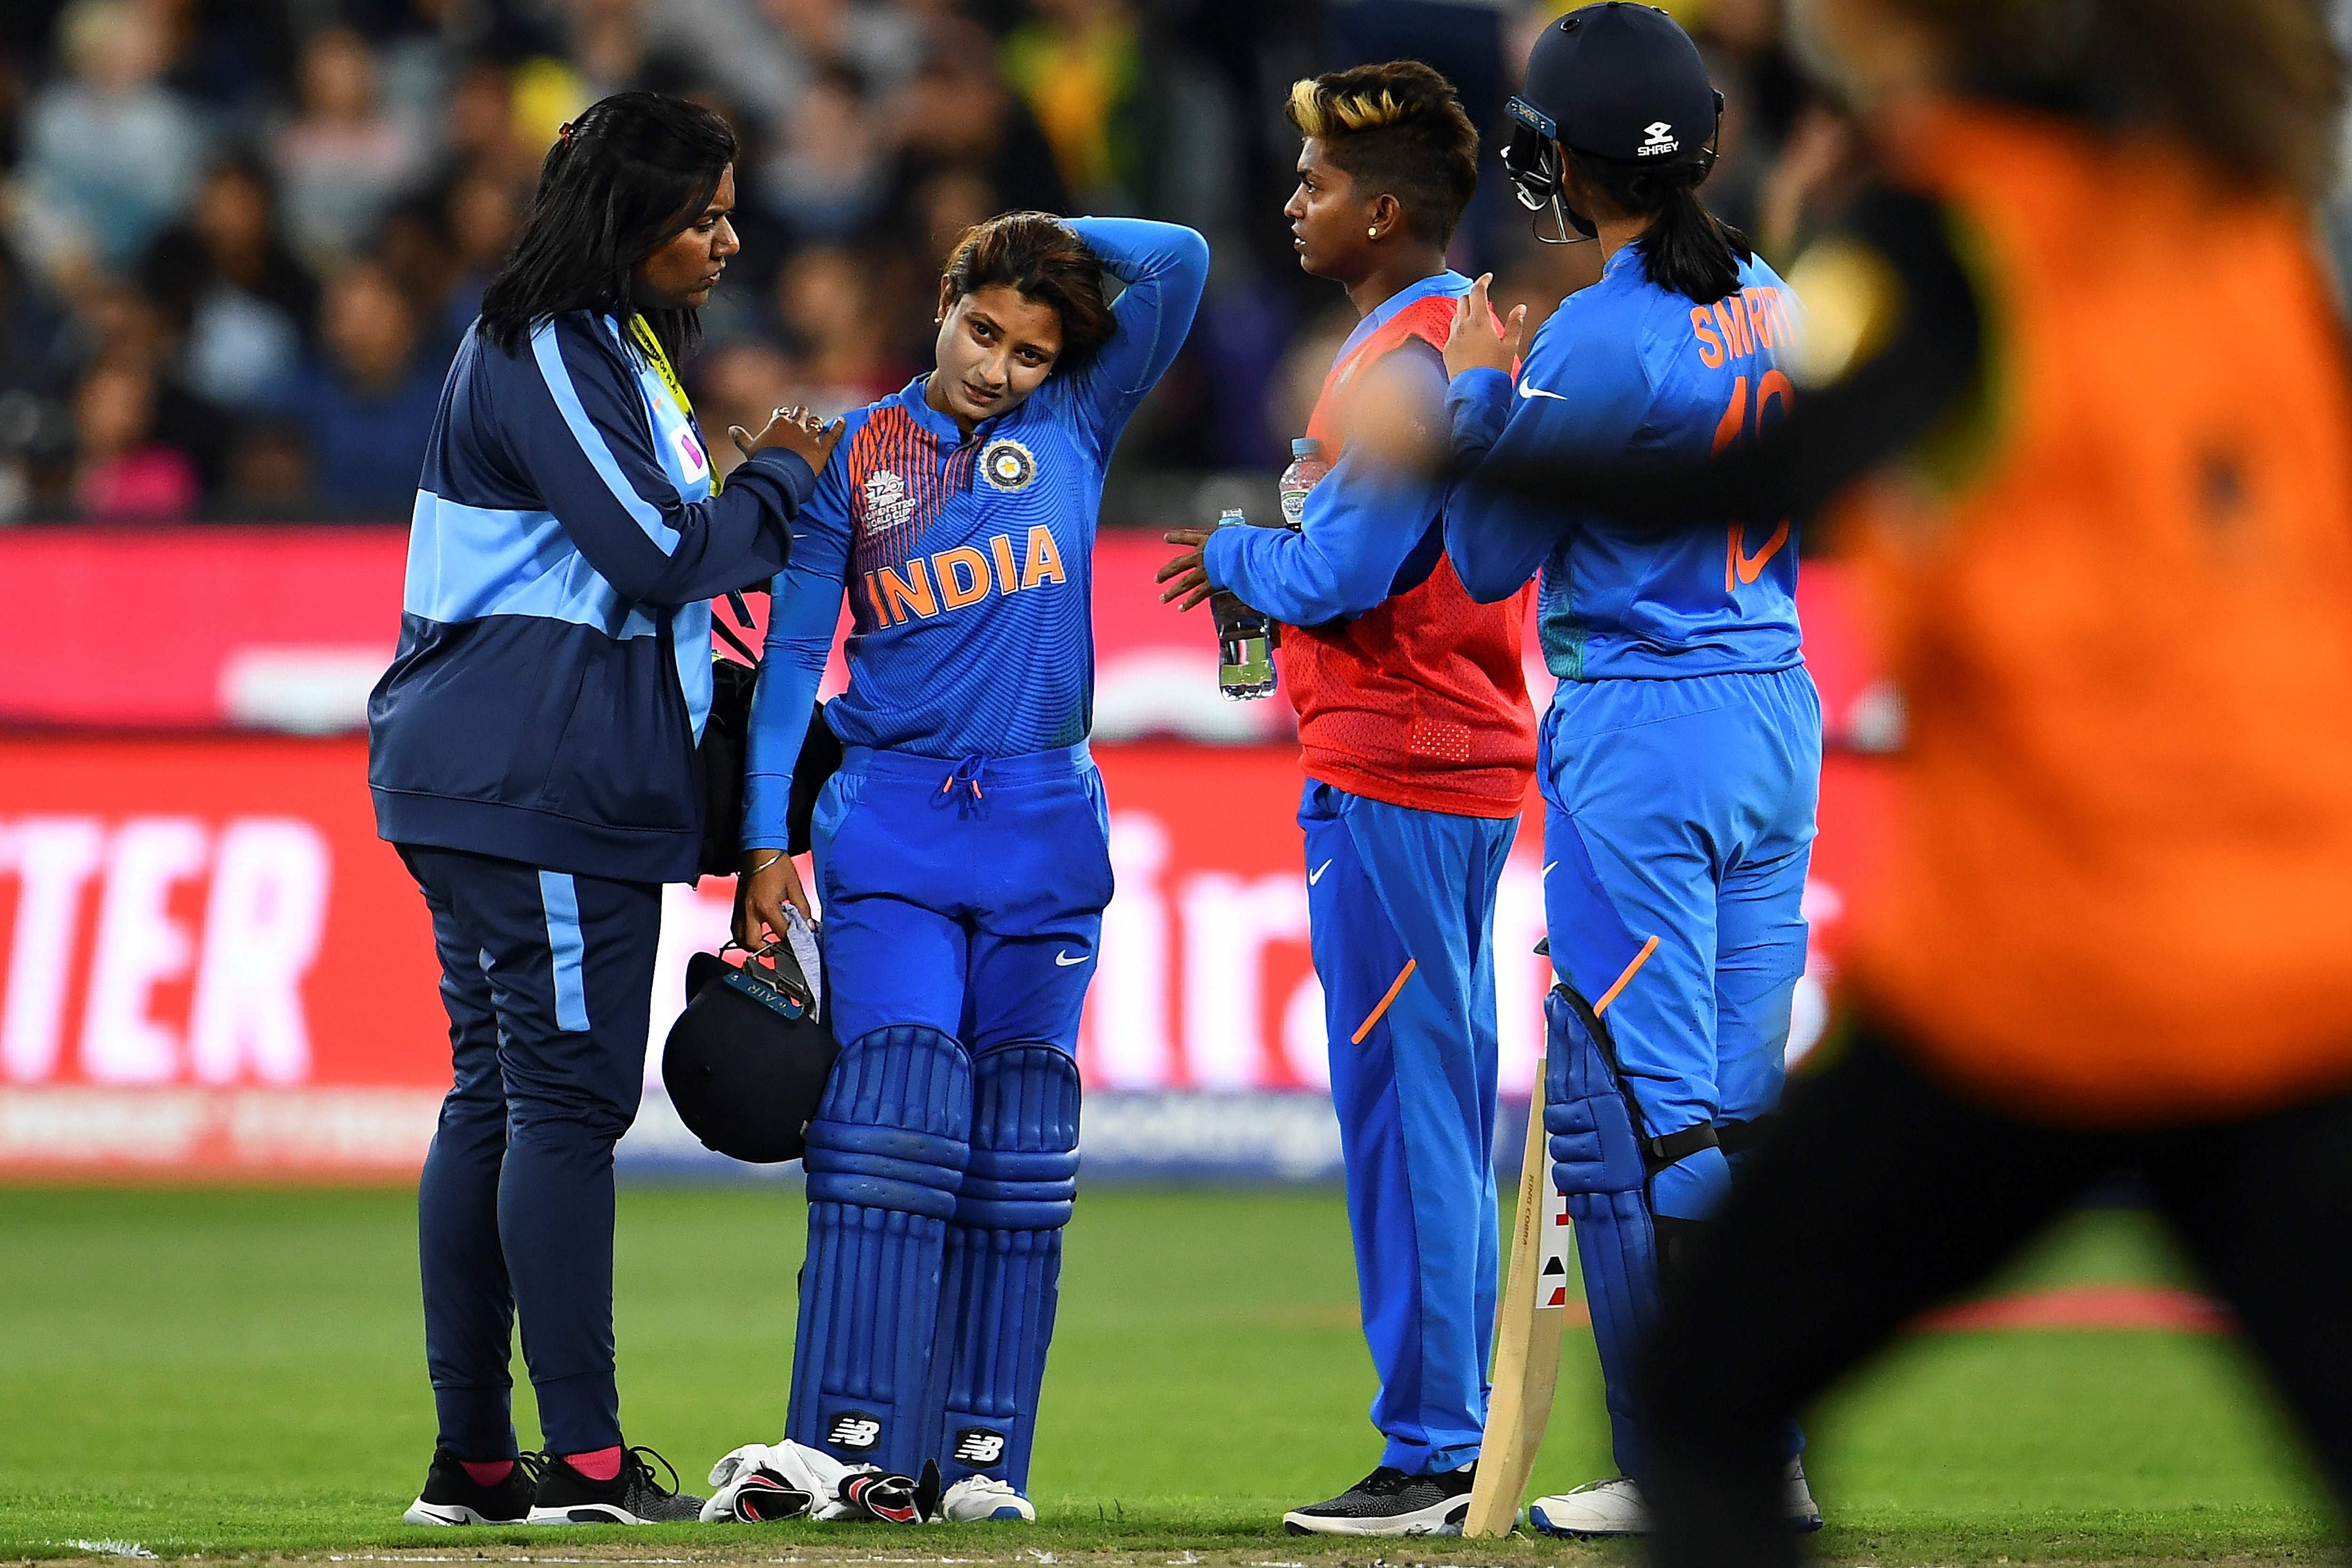 But Bhatia's stay was shortlived as she had to retire hurt in the second over after getting hit on her helmet by left-arm spinner Jess Jonassen. (Credit: AFP Photo)